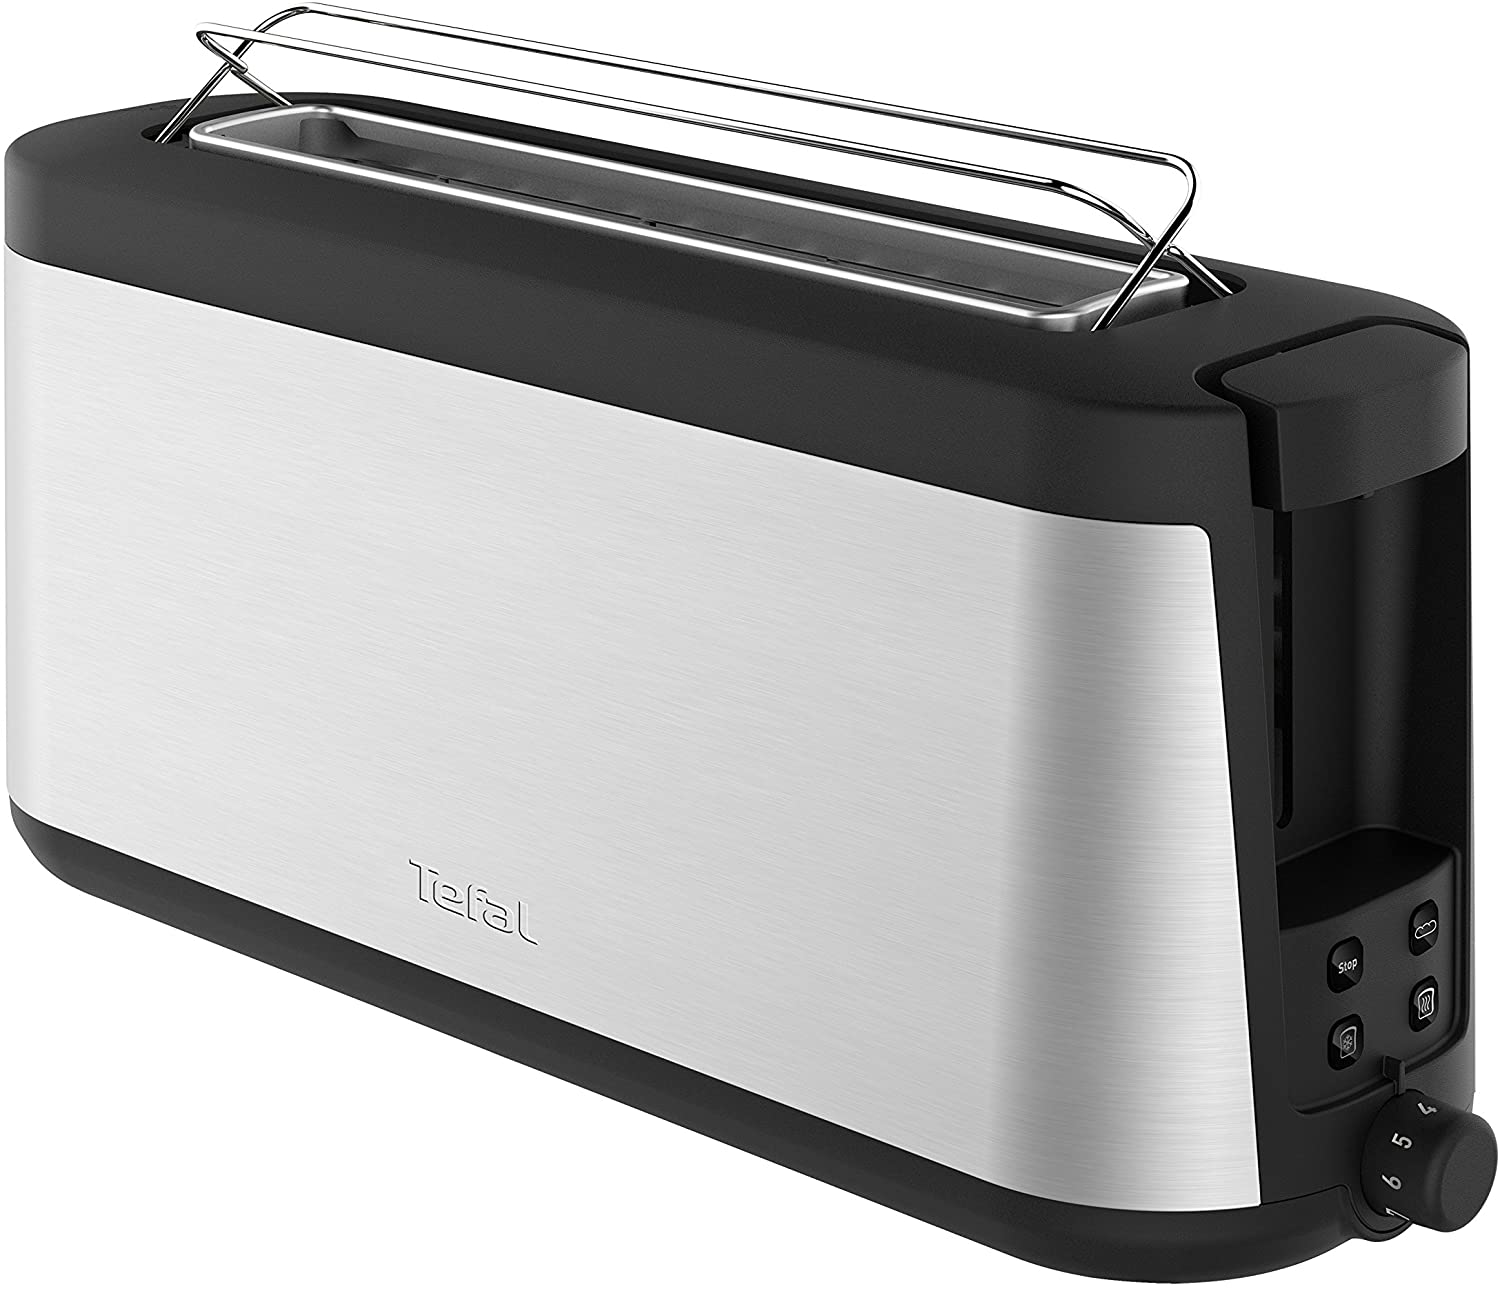 Tefal Element TL4308 Toaster, 7 Browning Levels, 1000 Watts, Silver/Black